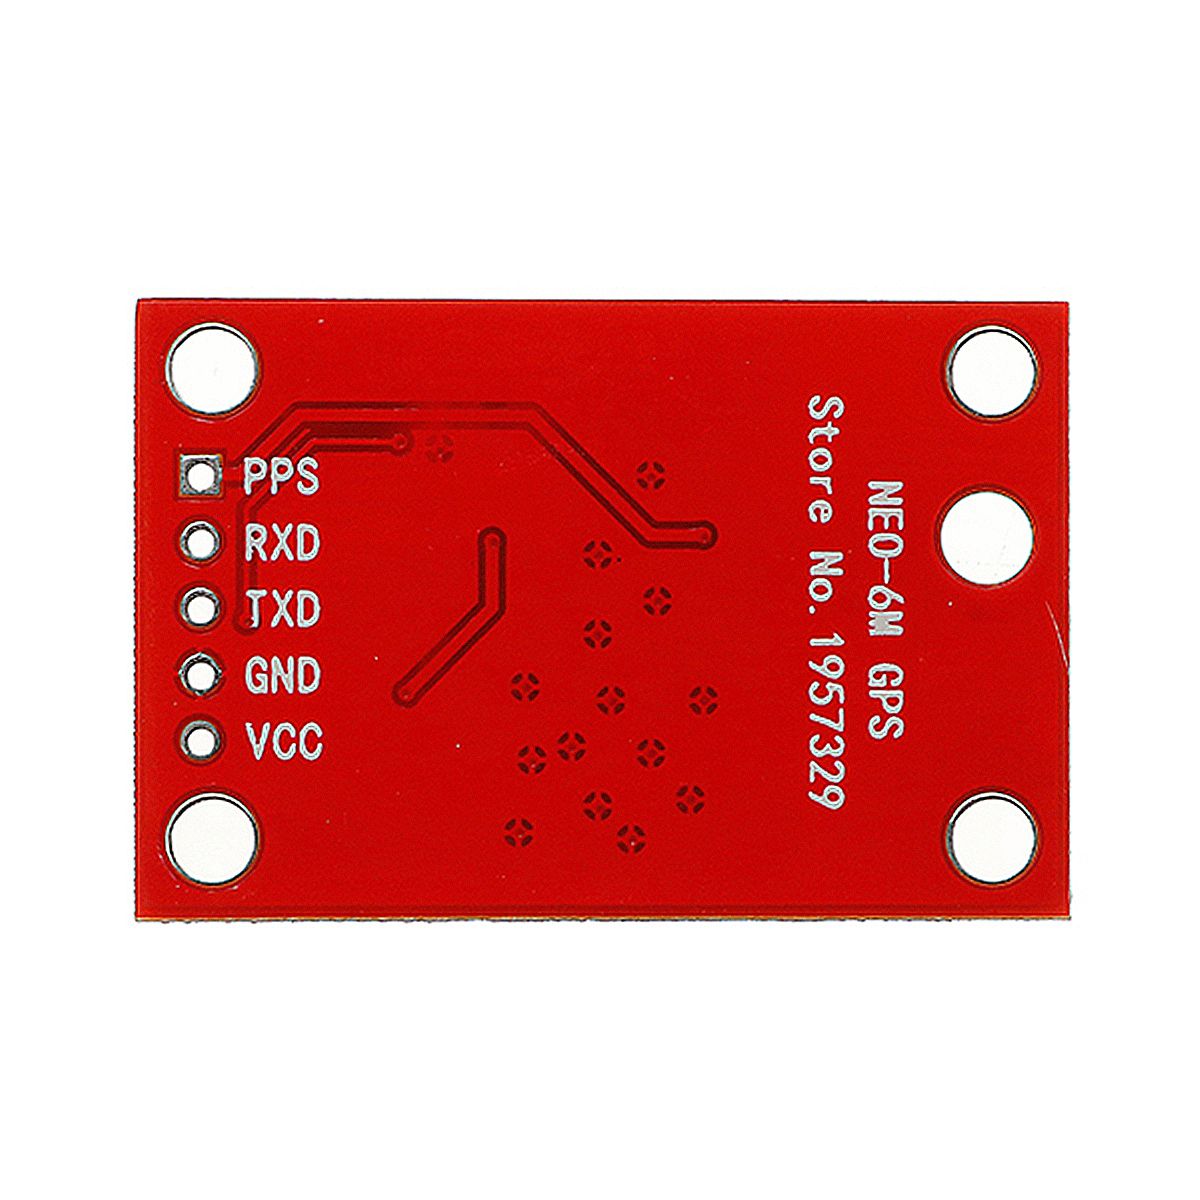 3Pcs-GY-GPS-Module-Board-9600-Baud-Rate-With-Antenna-Geekcreit-for-Arduino---products-that-work-with-1202448